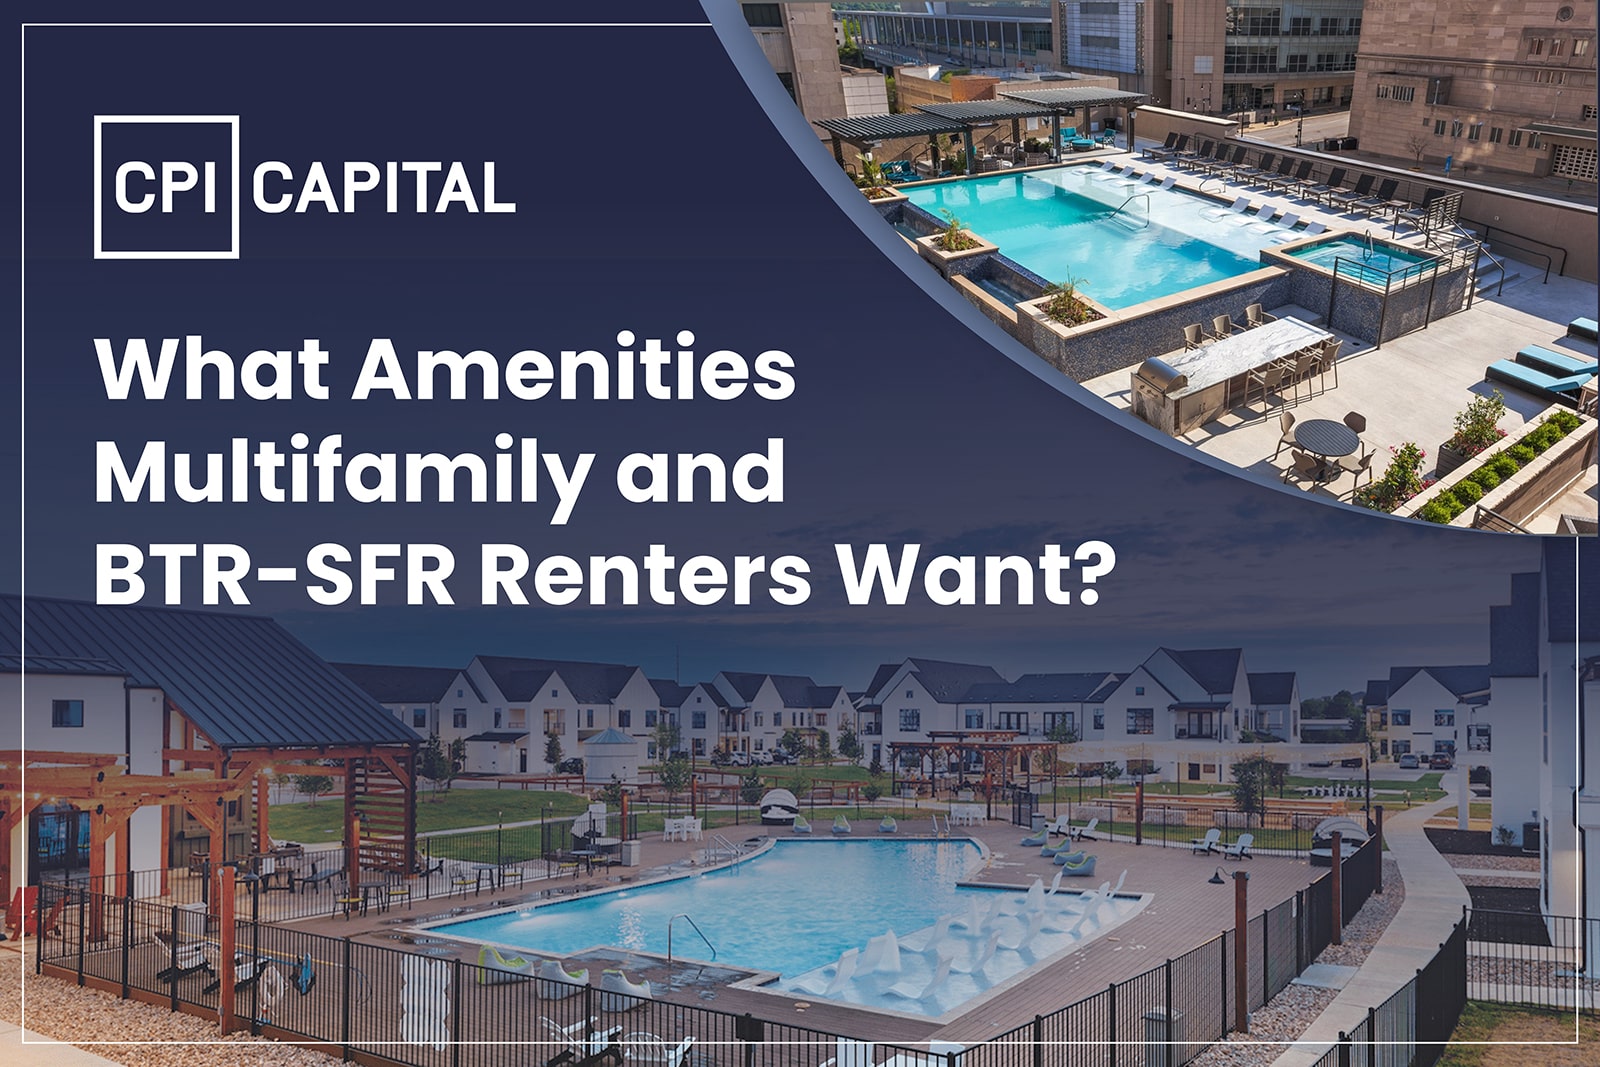 What Sort of Facilities and Amenities do Renters of Multifamily and BTR-SFR Properties want?